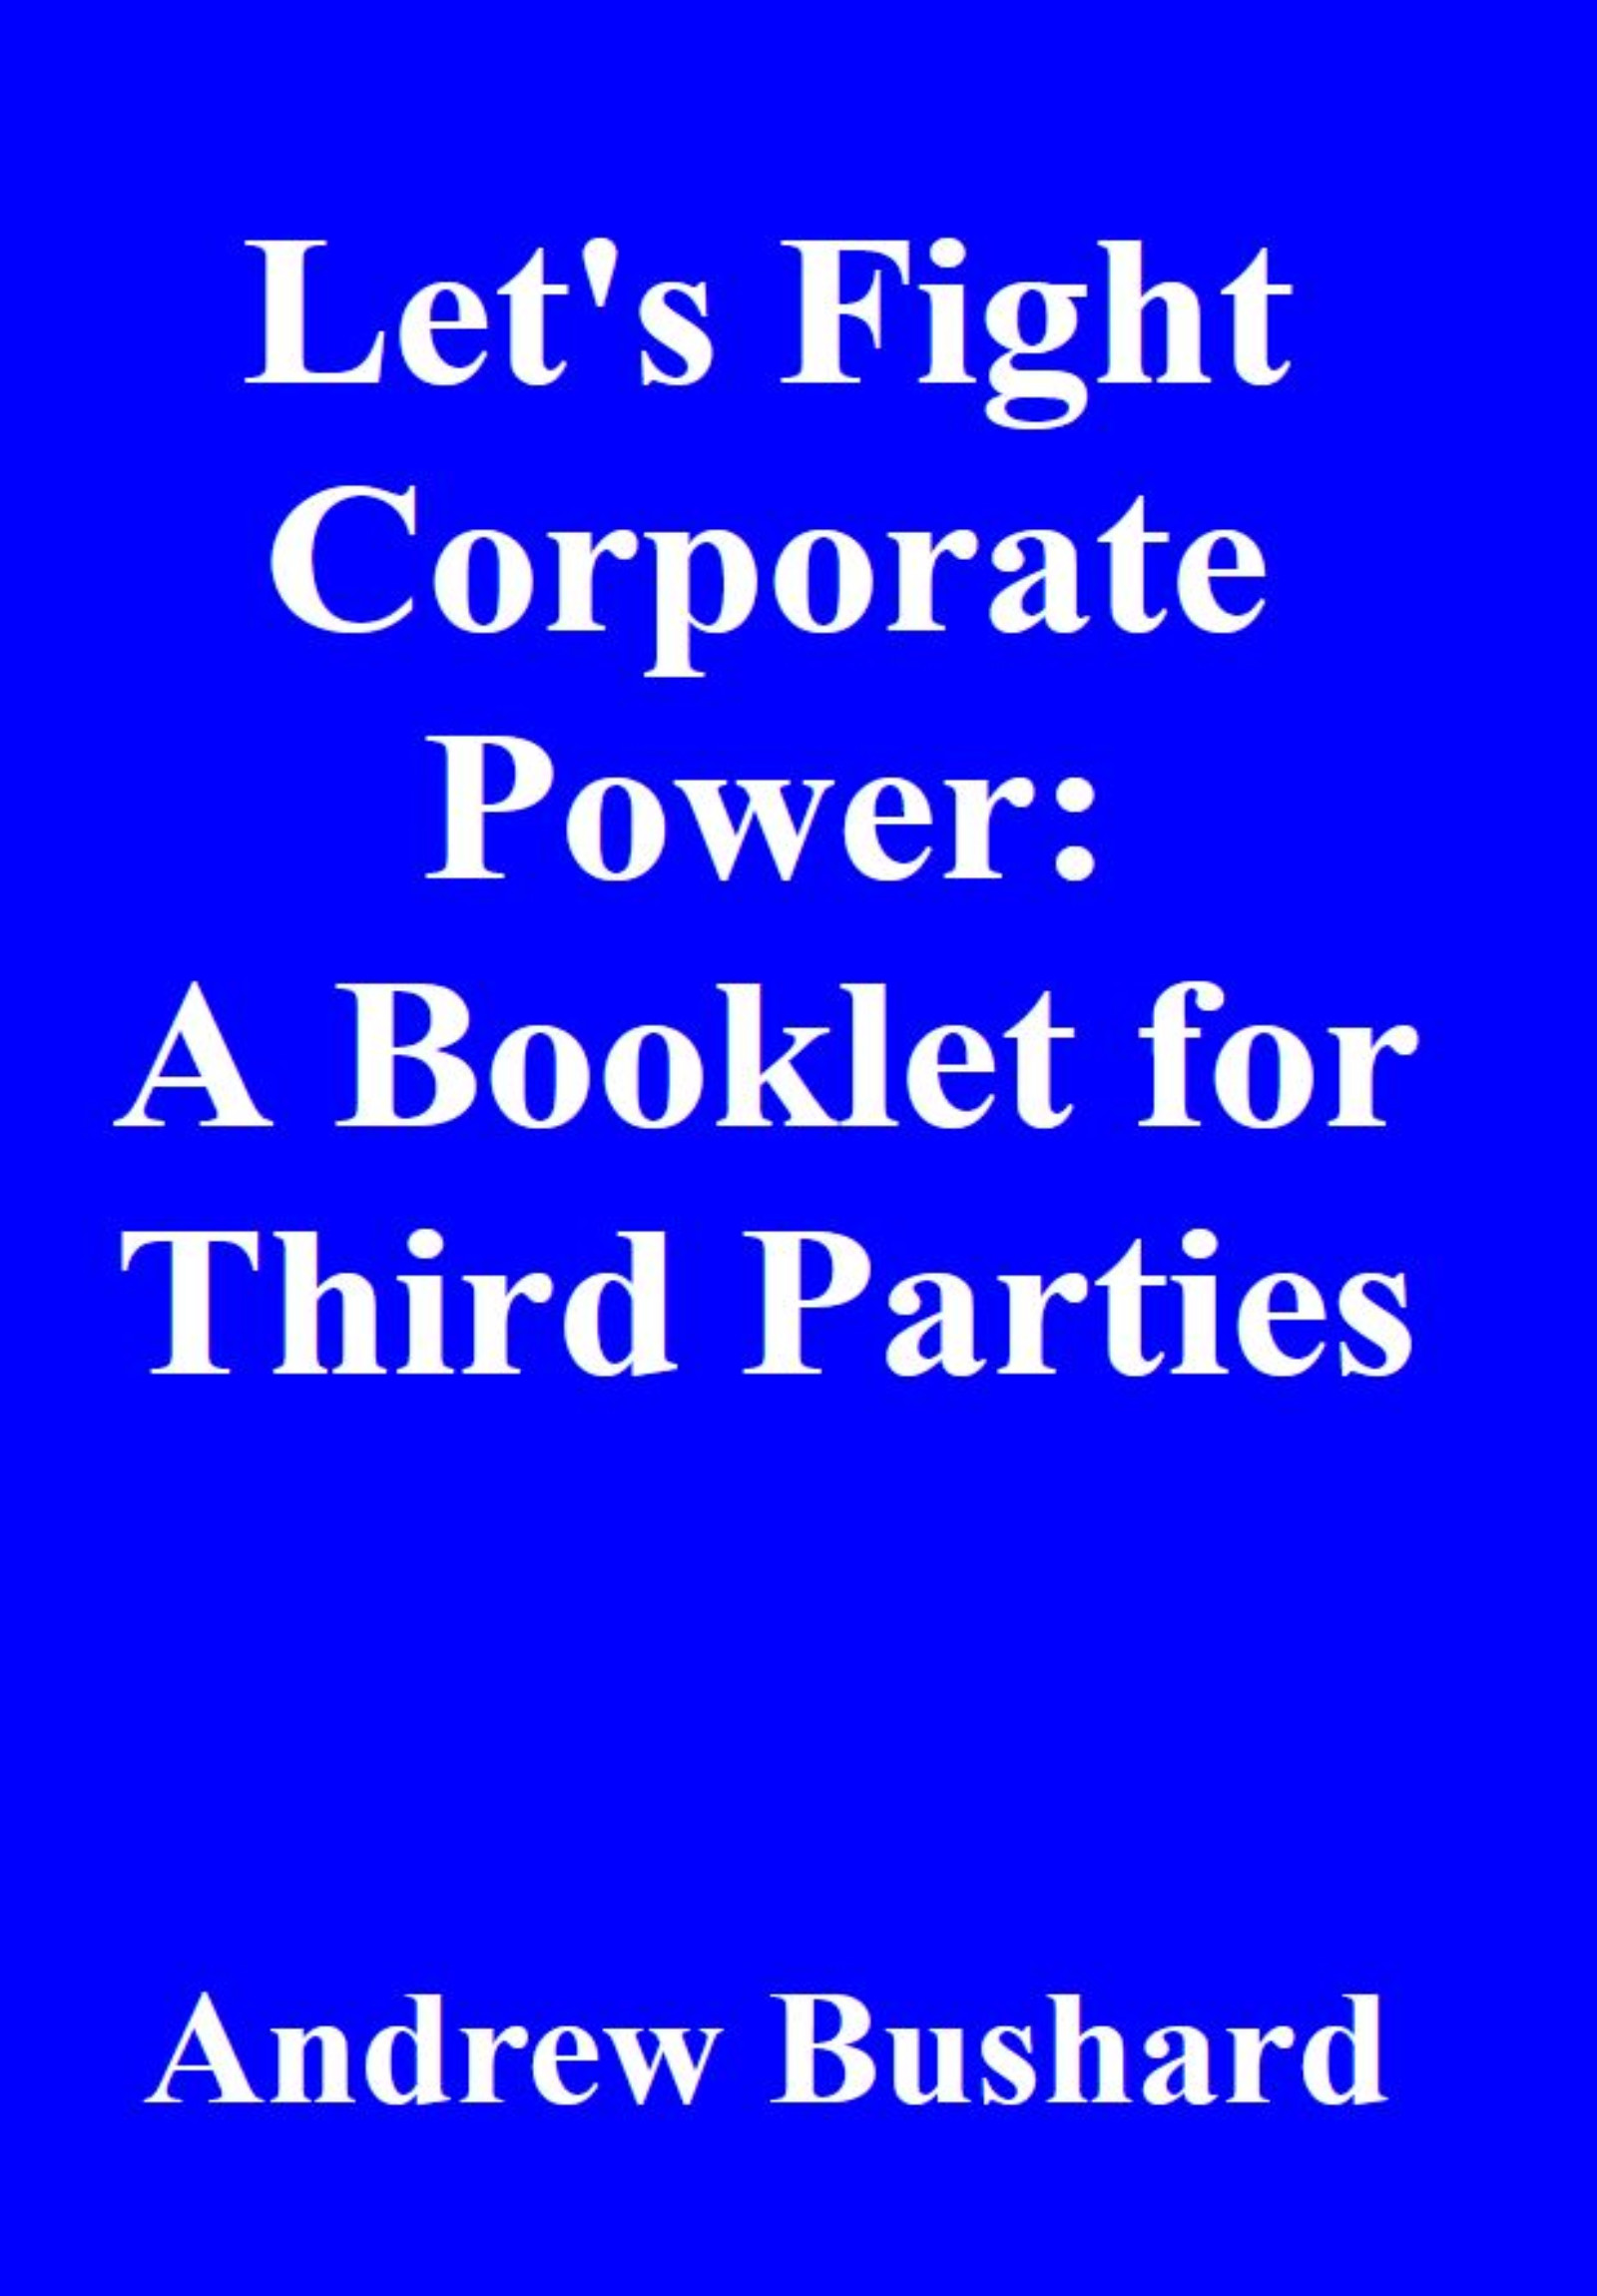 Let's Fight Corporate Power: A Booklet for Third Parties's featured image